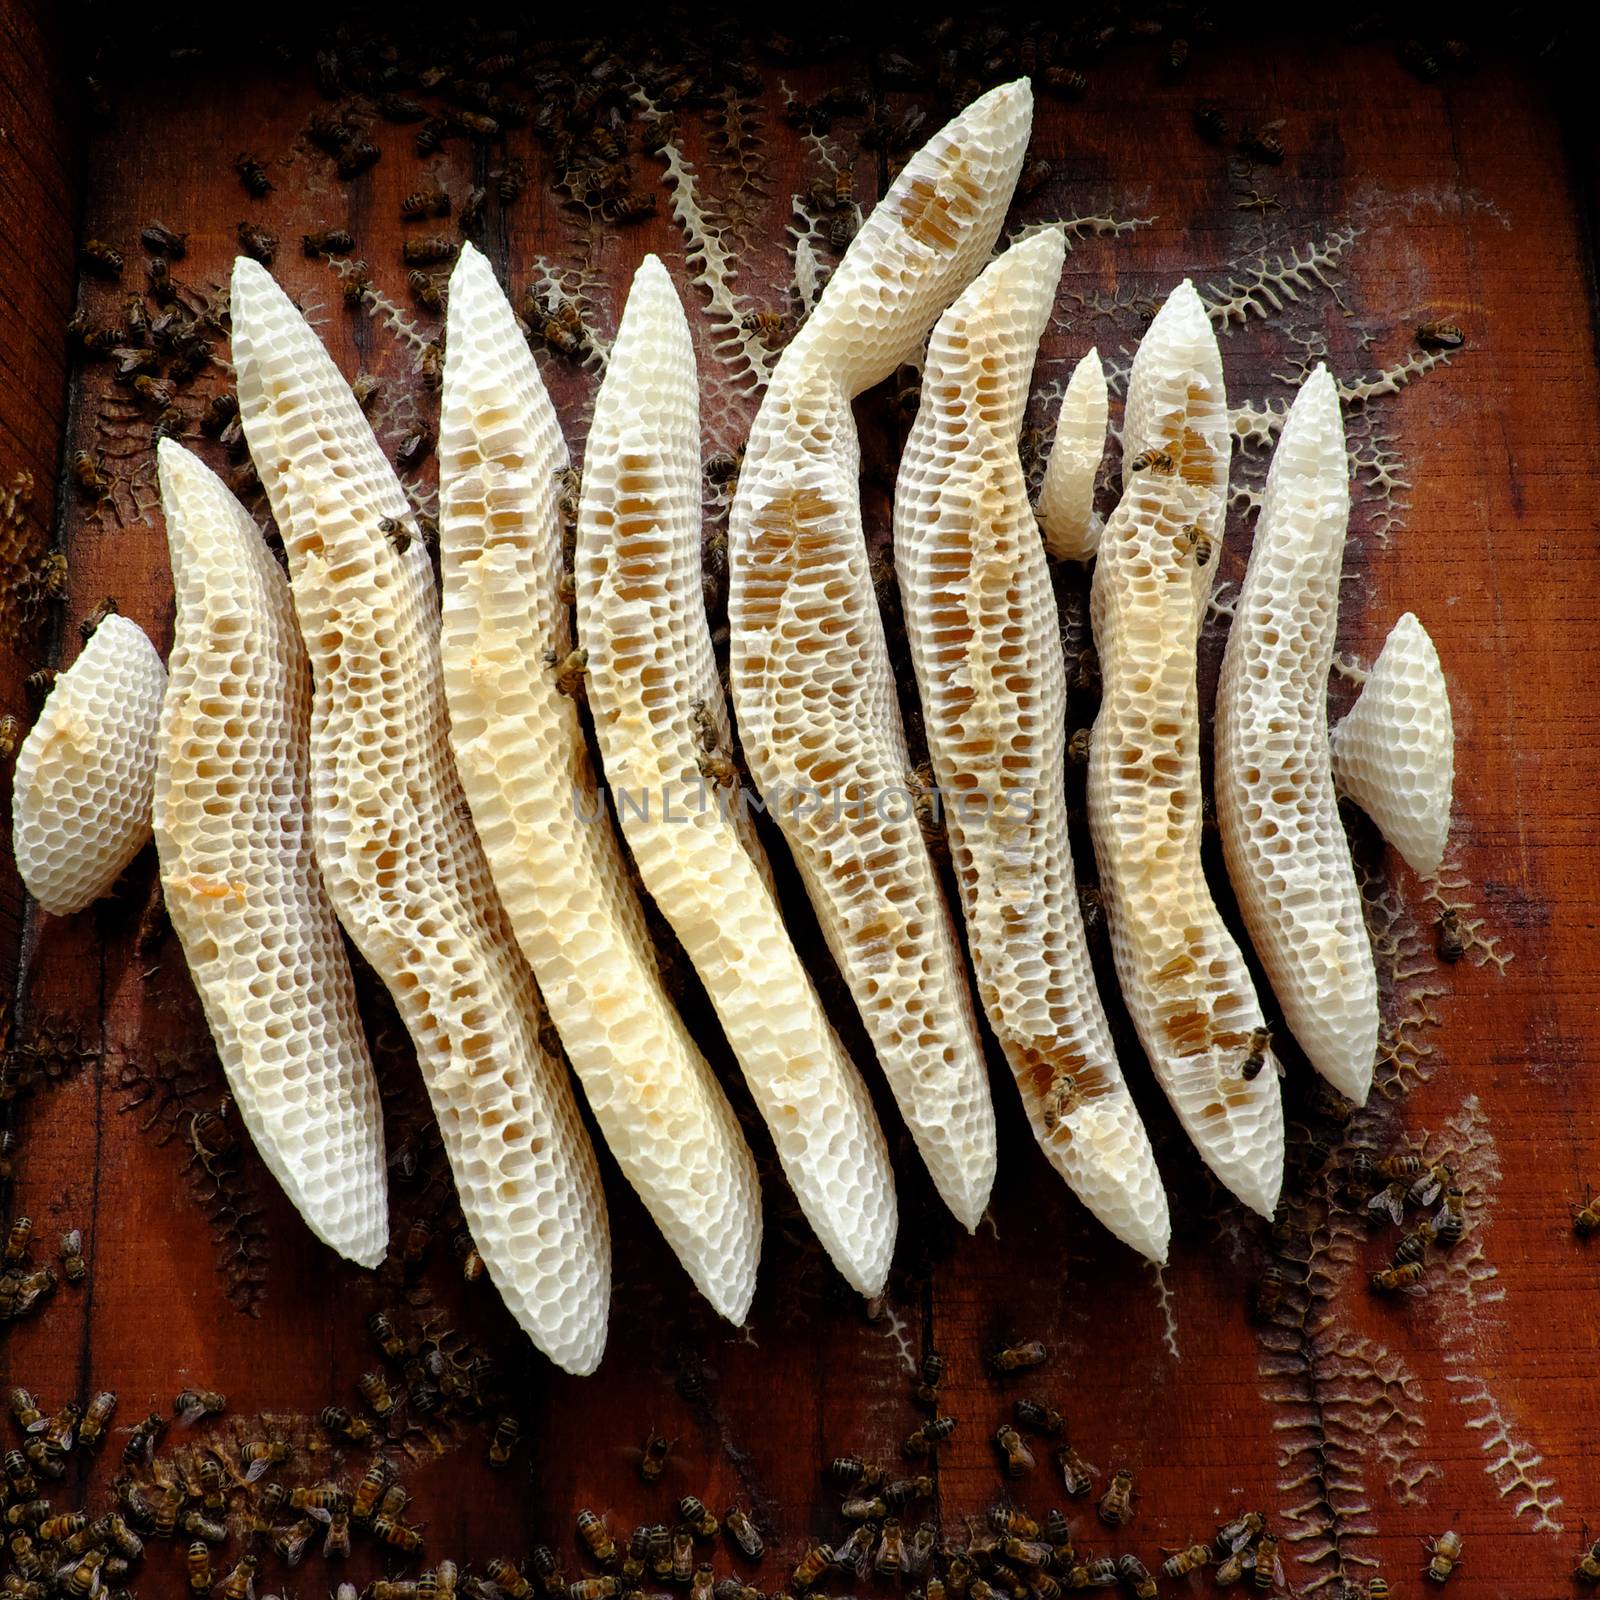 honeycomb with bee hive, Viet Nam apiculture by xuanhuongho